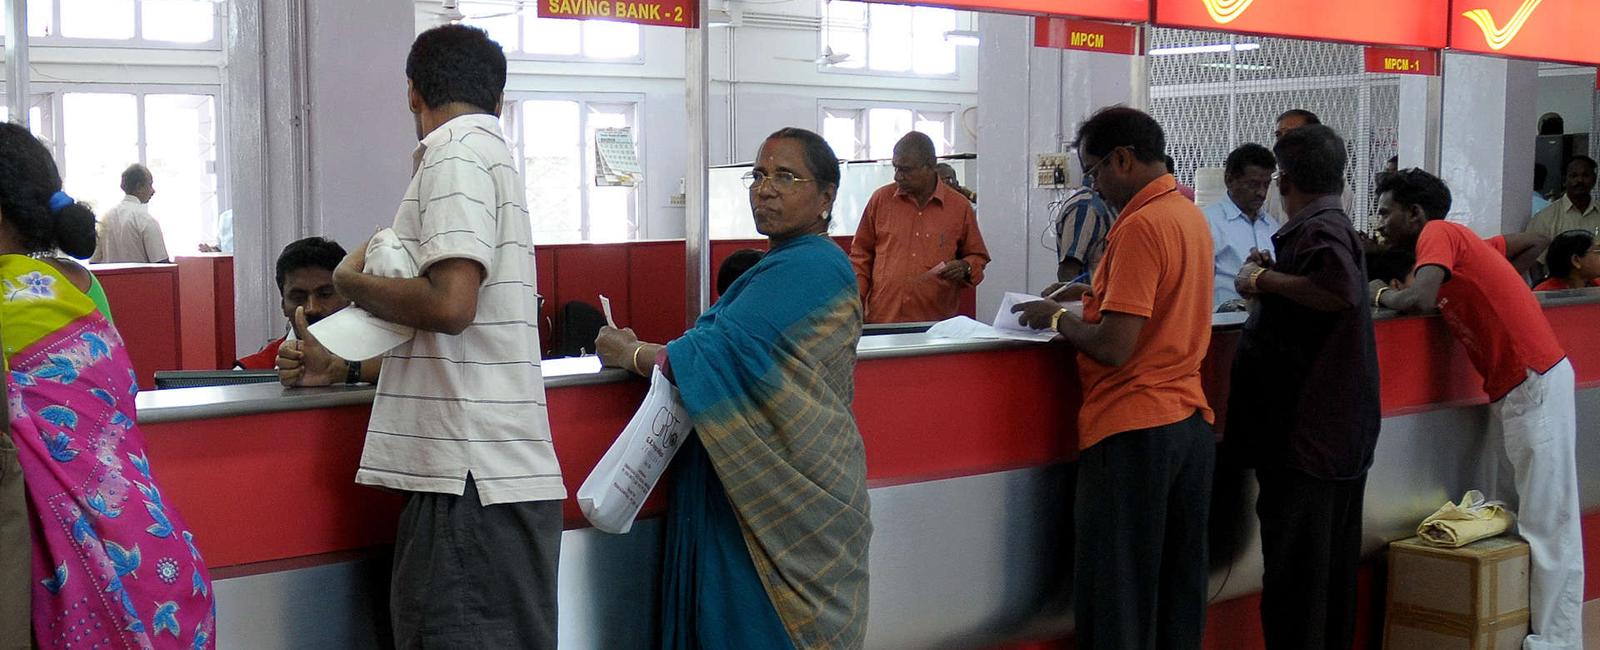 India has the most post offices than any other country over 100 000